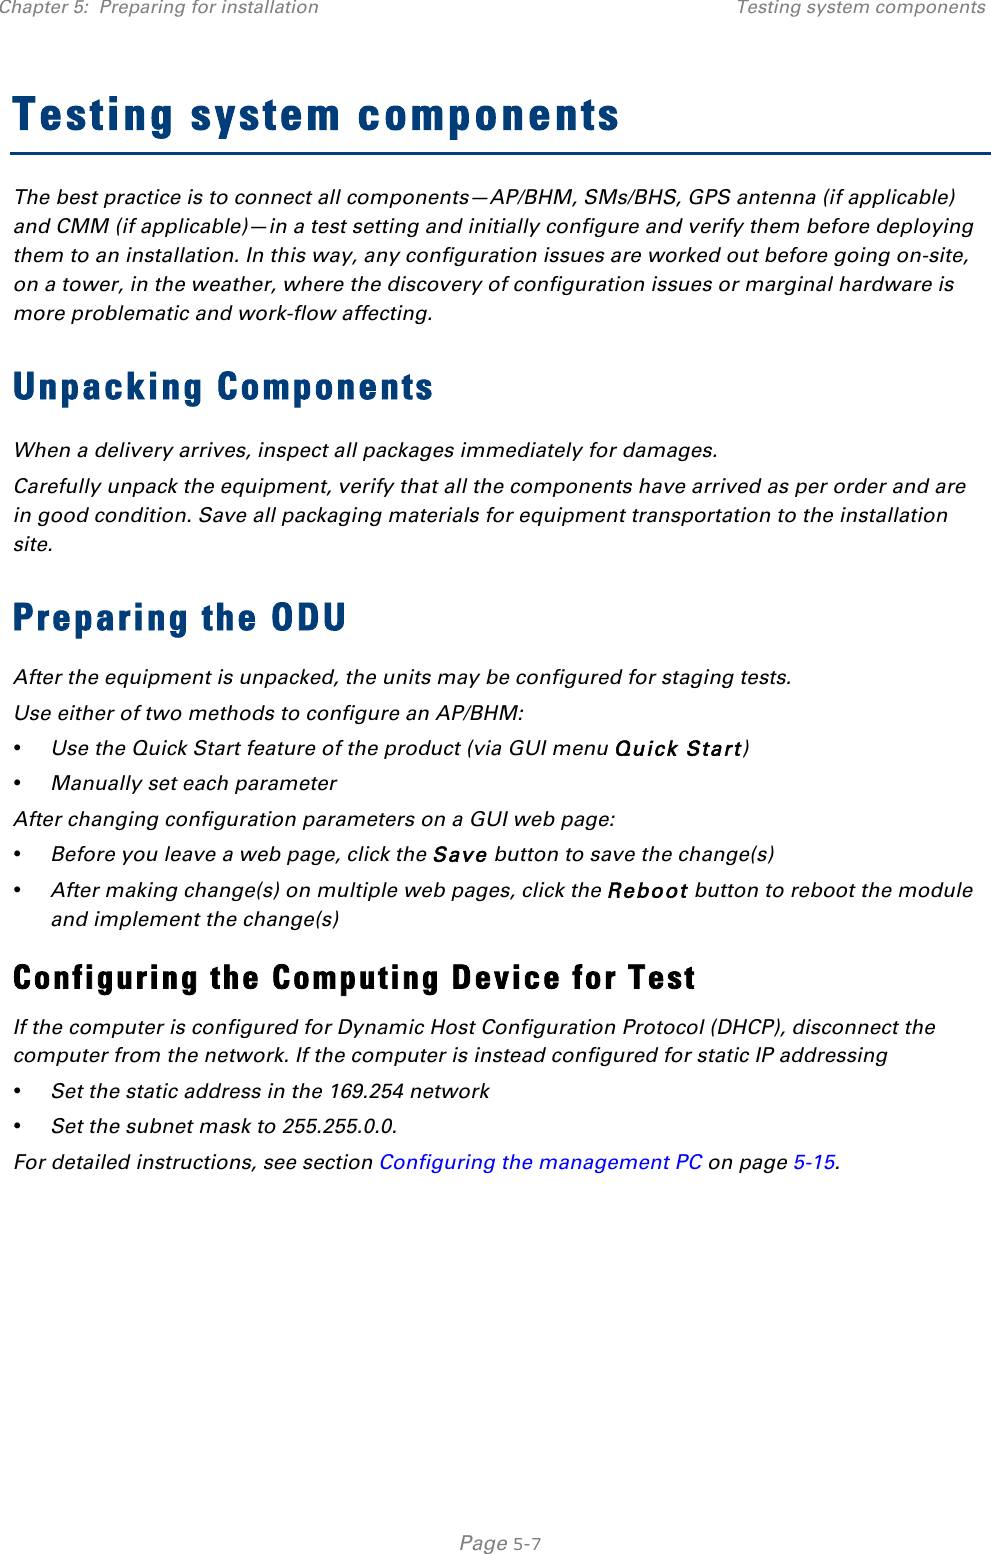 Chapter 5:  Preparing for installation Testing system components   Page 5-7 Testing system components The best practice is to connect all components—AP/BHM, SMs/BHS, GPS antenna (if applicable) and CMM (if applicable)—in a test setting and initially configure and verify them before deploying them to an installation. In this way, any configuration issues are worked out before going on-site, on a tower, in the weather, where the discovery of configuration issues or marginal hardware is more problematic and work-flow affecting. Unpacking Components When a delivery arrives, inspect all packages immediately for damages.  Carefully unpack the equipment, verify that all the components have arrived as per order and are in good condition. Save all packaging materials for equipment transportation to the installation site.  Preparing the ODU After the equipment is unpacked, the units may be configured for staging tests. Use either of two methods to configure an AP/BHM: • Use the Quick Start feature of the product (via GUI menu Quick Start) • Manually set each parameter After changing configuration parameters on a GUI web page: • Before you leave a web page, click the Save button to save the change(s) • After making change(s) on multiple web pages, click the Reboot button to reboot the module and implement the change(s) Configuring the Computing Device for Test If the computer is configured for Dynamic Host Configuration Protocol (DHCP), disconnect the computer from the network. If the computer is instead configured for static IP addressing • Set the static address in the 169.254 network  • Set the subnet mask to 255.255.0.0. For detailed instructions, see section Configuring the management PC on page 5-15.    